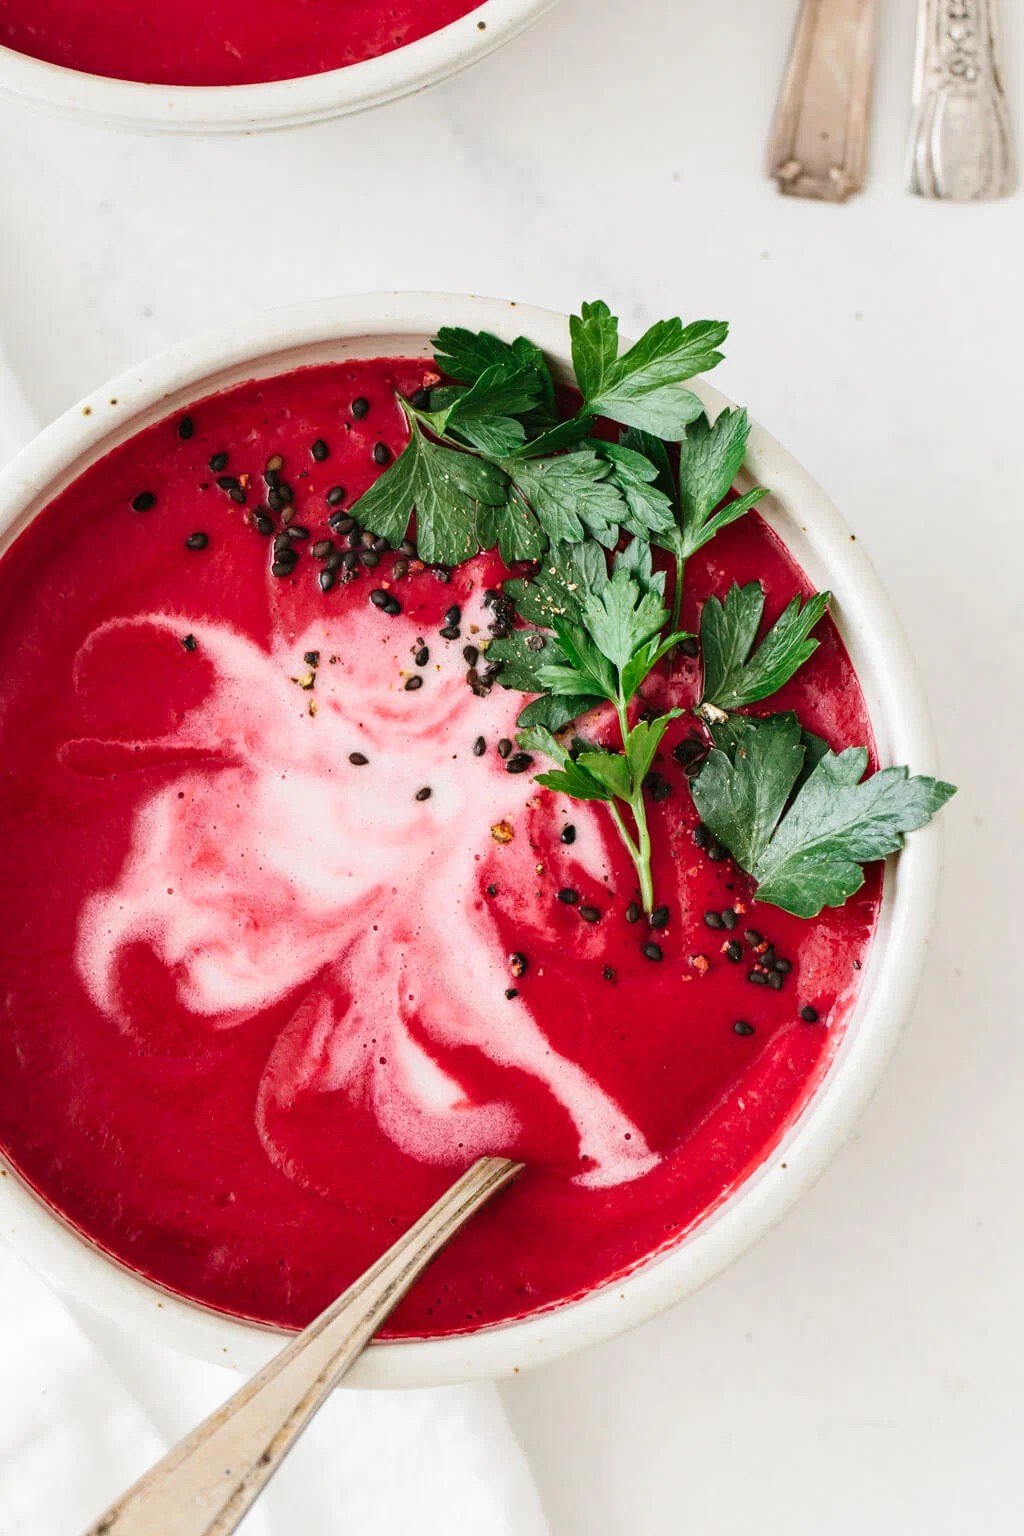 Beet soup garnished with parsley in a bowl.